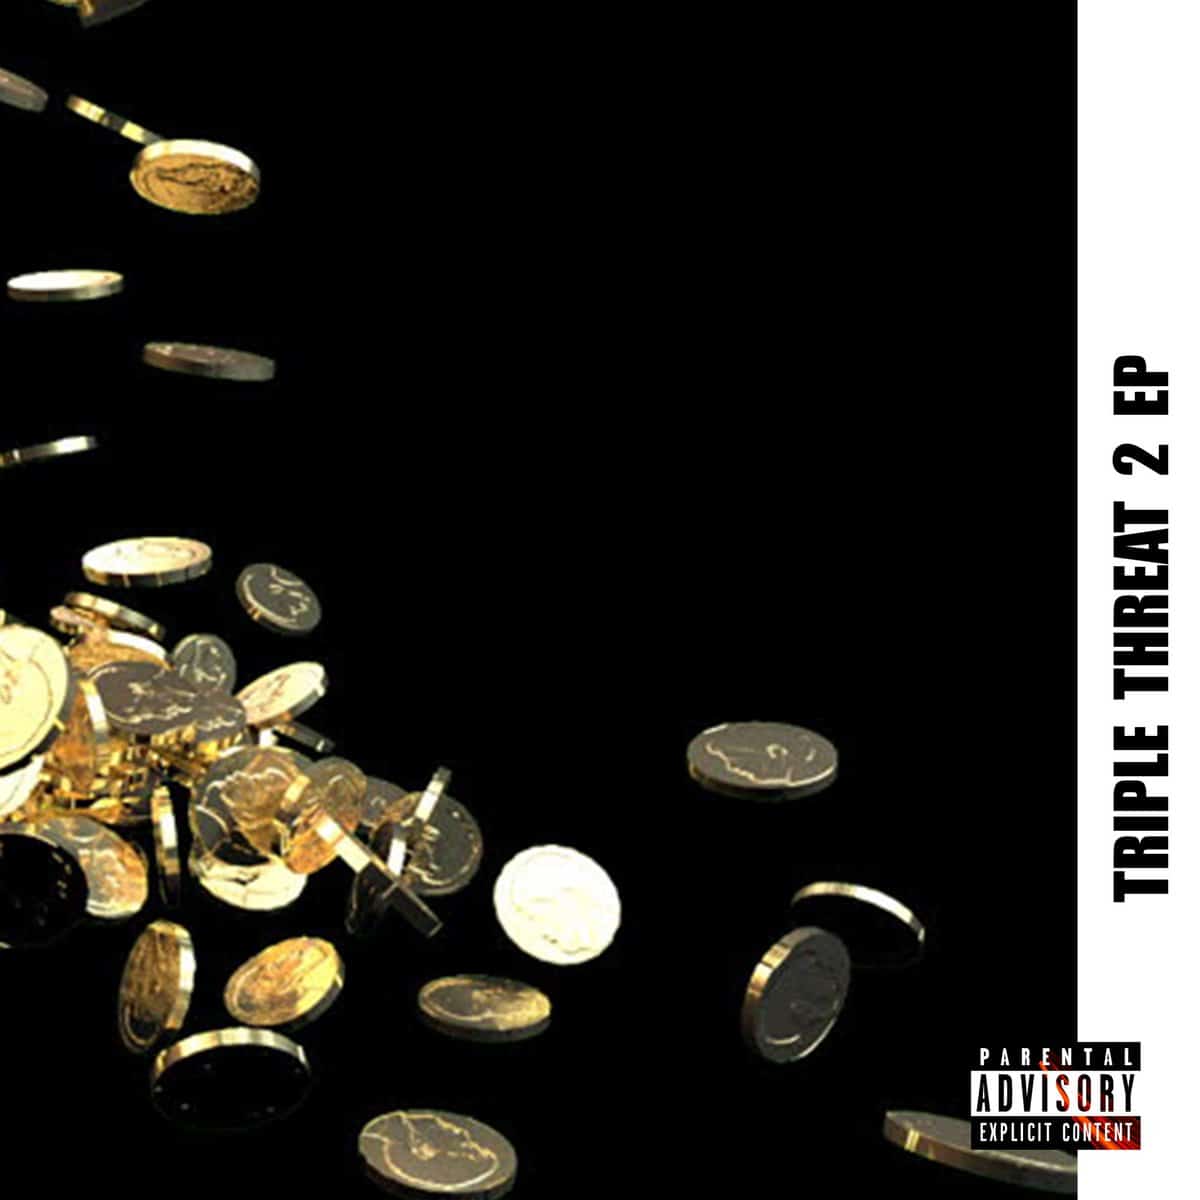 Klu’s ‘Triple Threat 2’ EP just dropped and it’s an impressive showcase